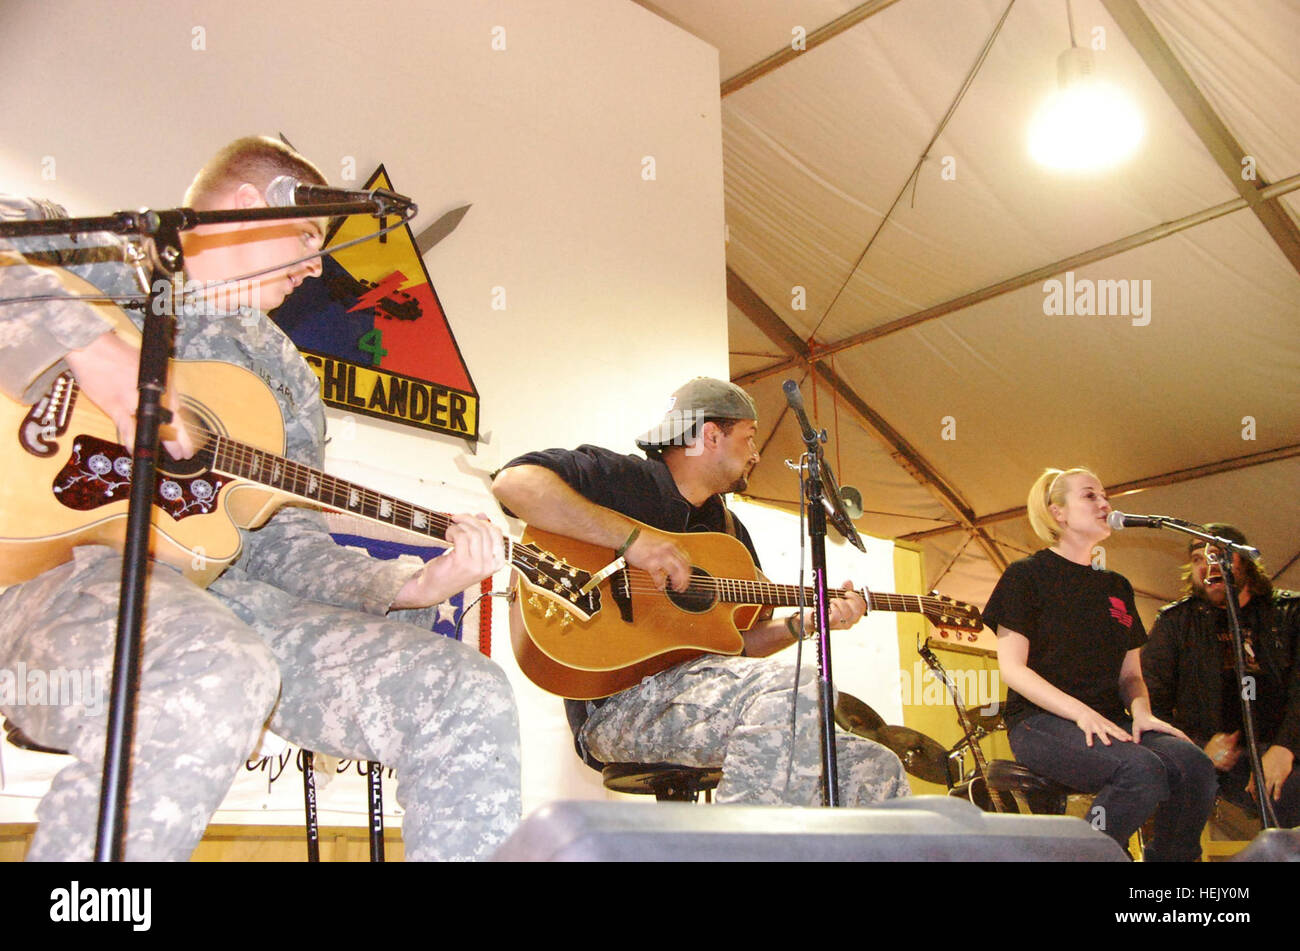 Pfc. Joshua Goad, a motor transport operator from Murfreesboro, Tenn., joins the backing band of country music recording artist Kellie Pickler, of American Idol, fame during a performance of her latest single, 'Red High Heels' at Contingency Operating Base Adder, Iraq, Jan. 17. Pickler, touring with recording artists Randy Houser and Jamey Johnson, picked Goad out of the crowd for the song. Goad is assigned to the 121st Brigade Support Battalion of 4th Brigade, 1st Armored Division 'Highlander' deployed out of Fort Bliss, Texas. The Highlander Brigade advises and assists Iraqi security forces  Stock Photo